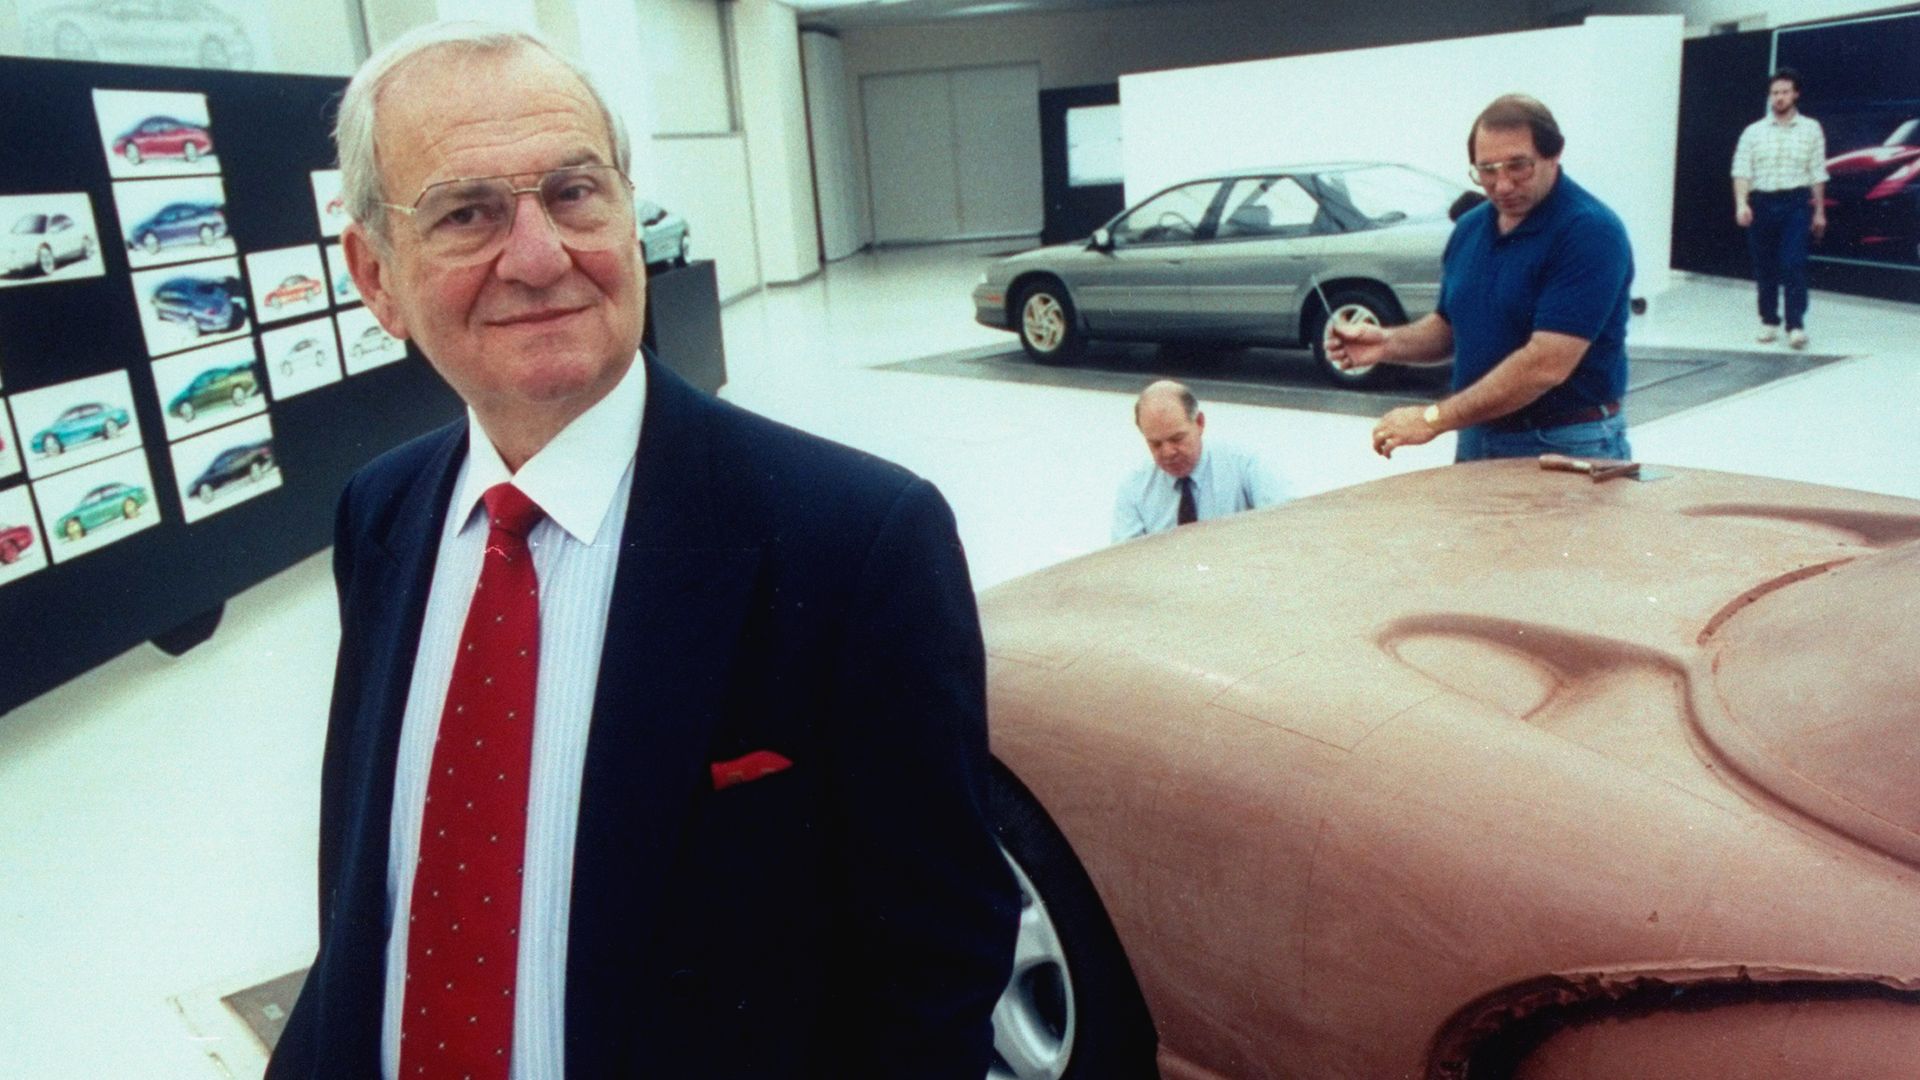 Chrysler Corp. Chmn. Lee Iacocca posing in front of full-sized clay model of the proposed Viper sports car being worked on by staff technicians.